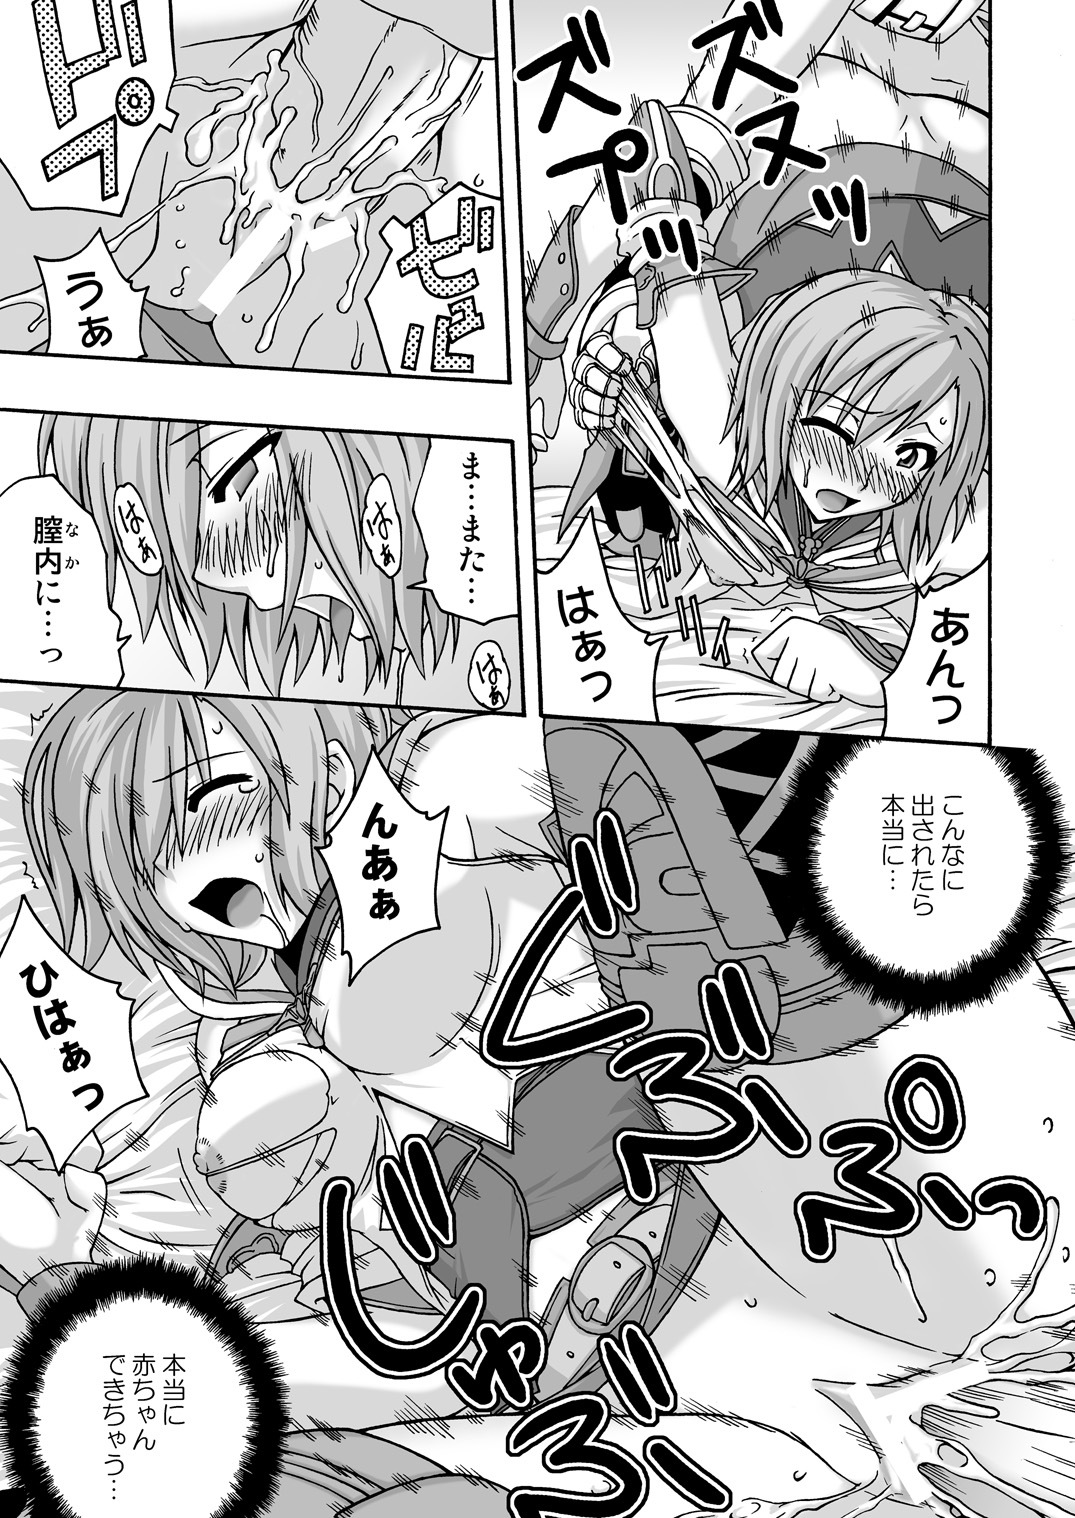 (C70) [FruitsJam (Mikagami Sou)] In the ROOM (Final Fantasy XII) page 22 full